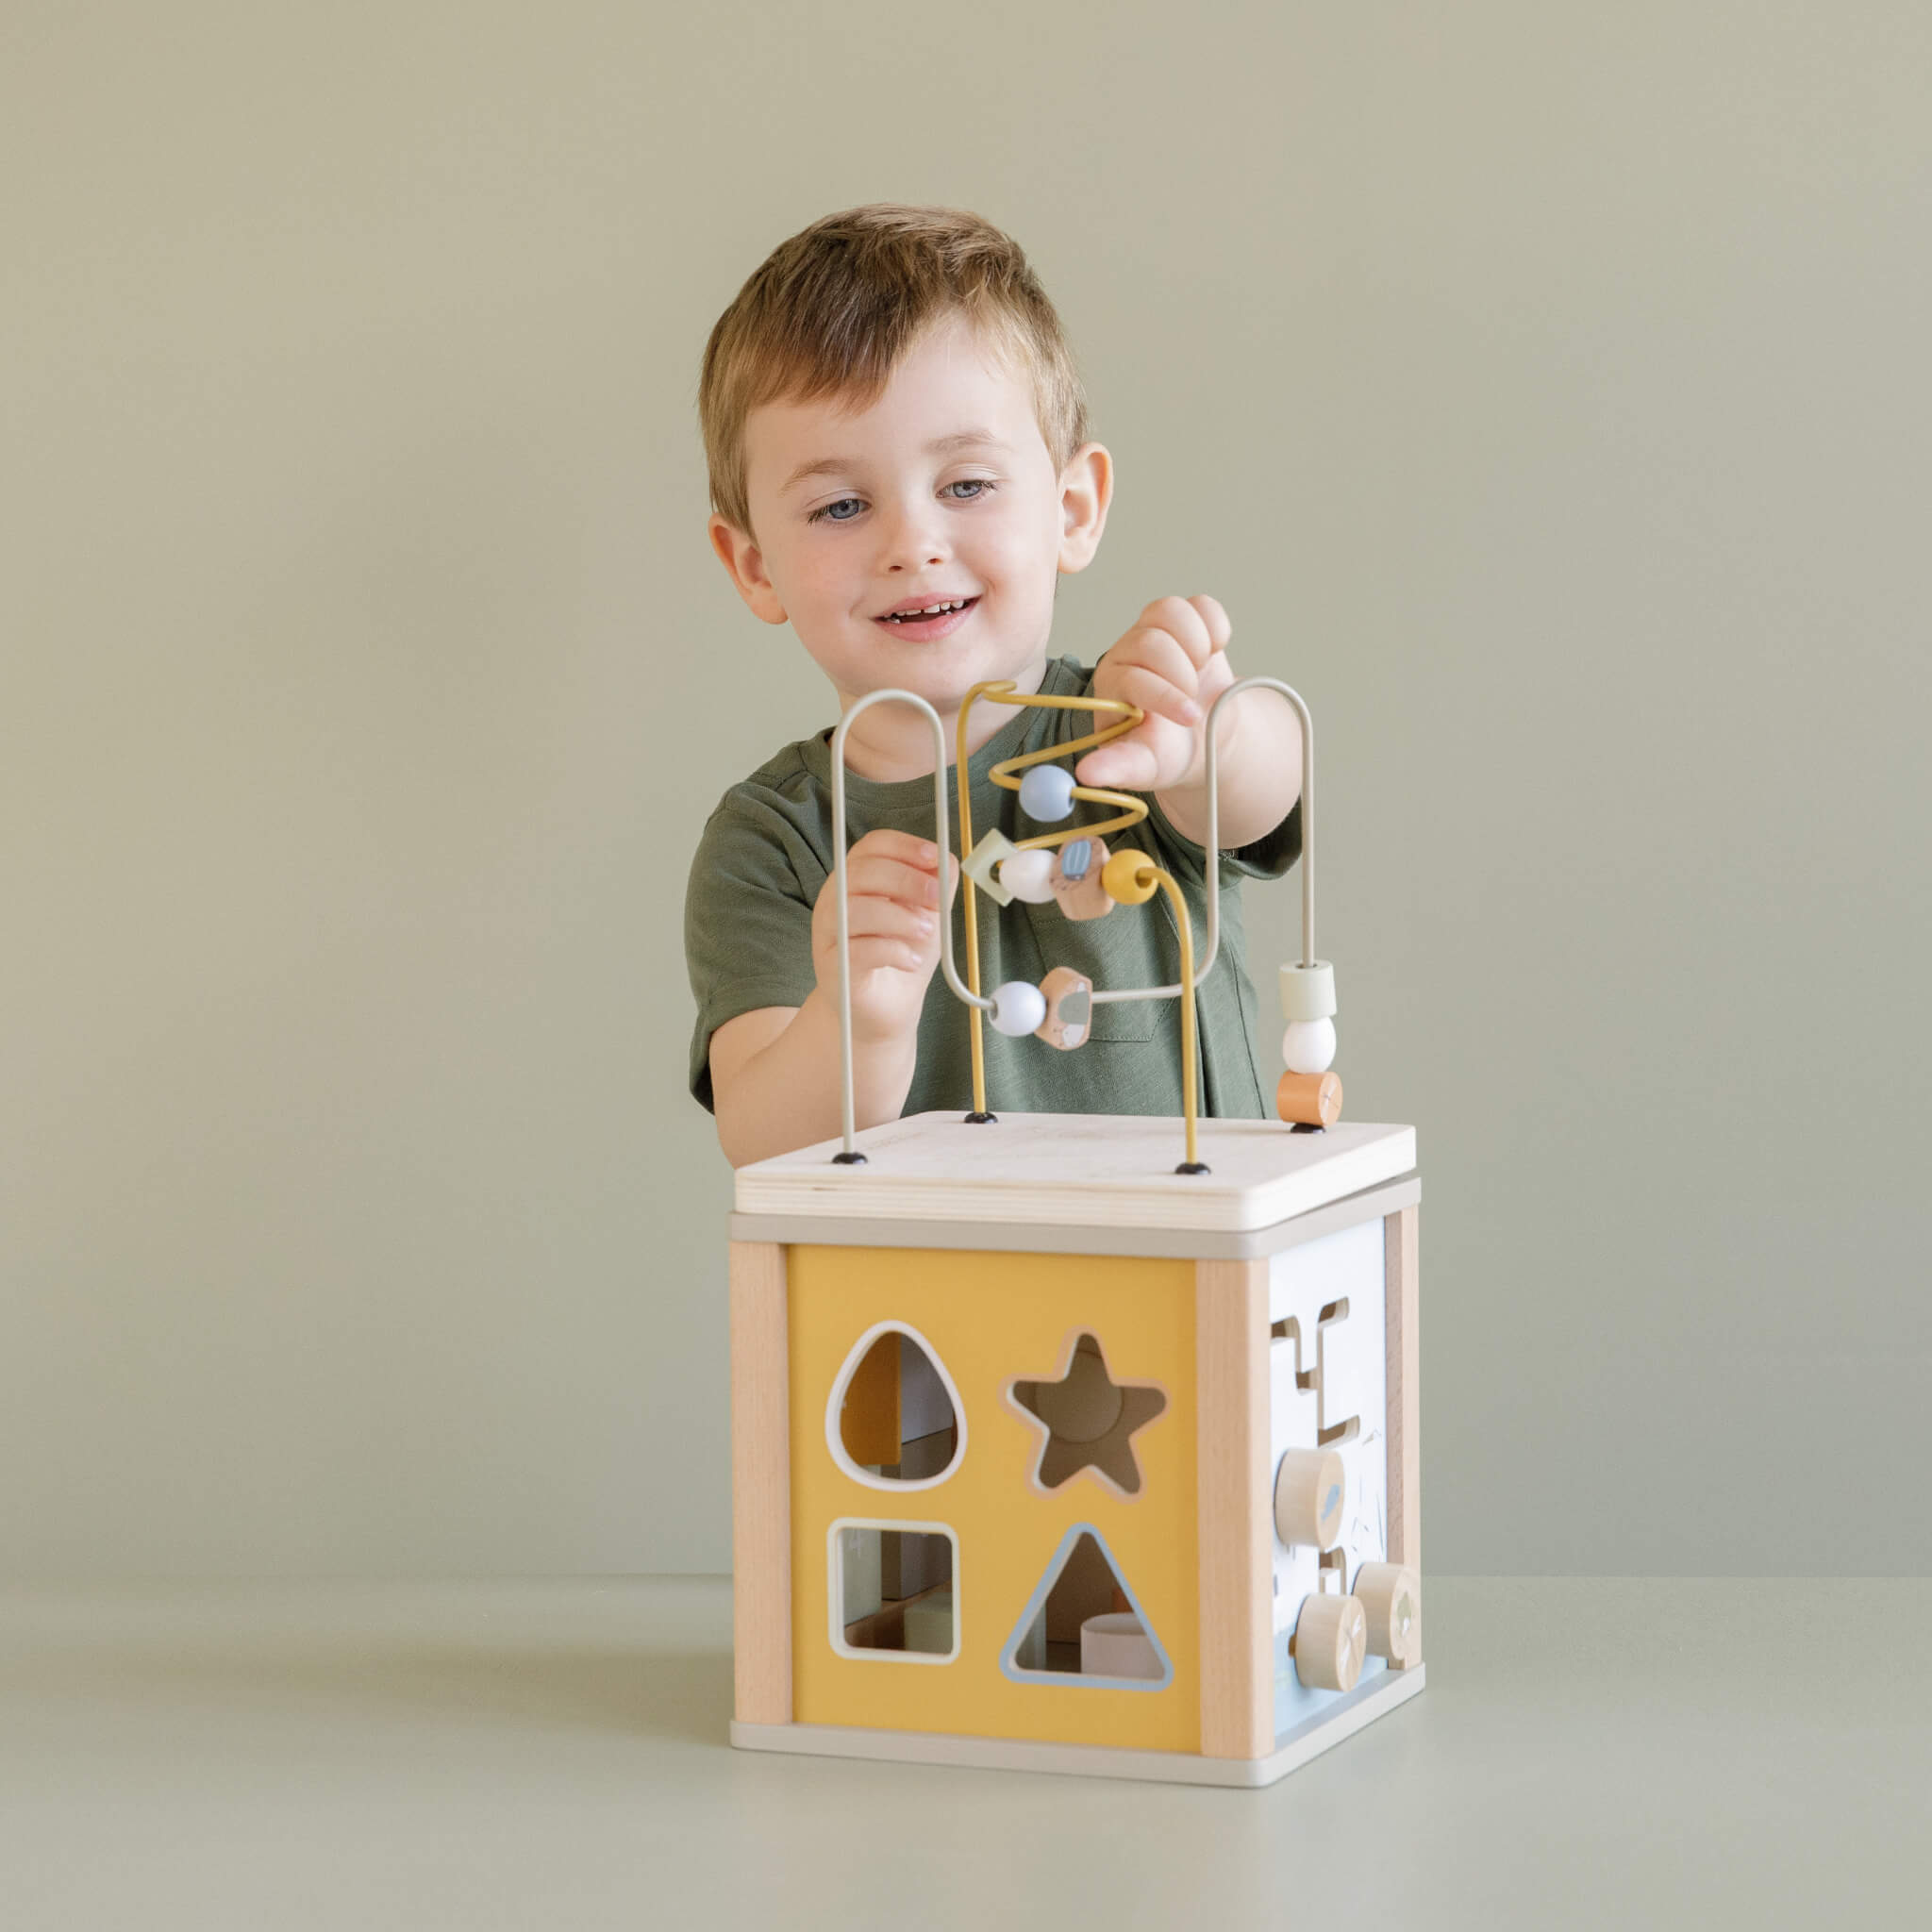 Boy Playing with Little Dutch Wooden Activity Cube Toy in Little Goose Design